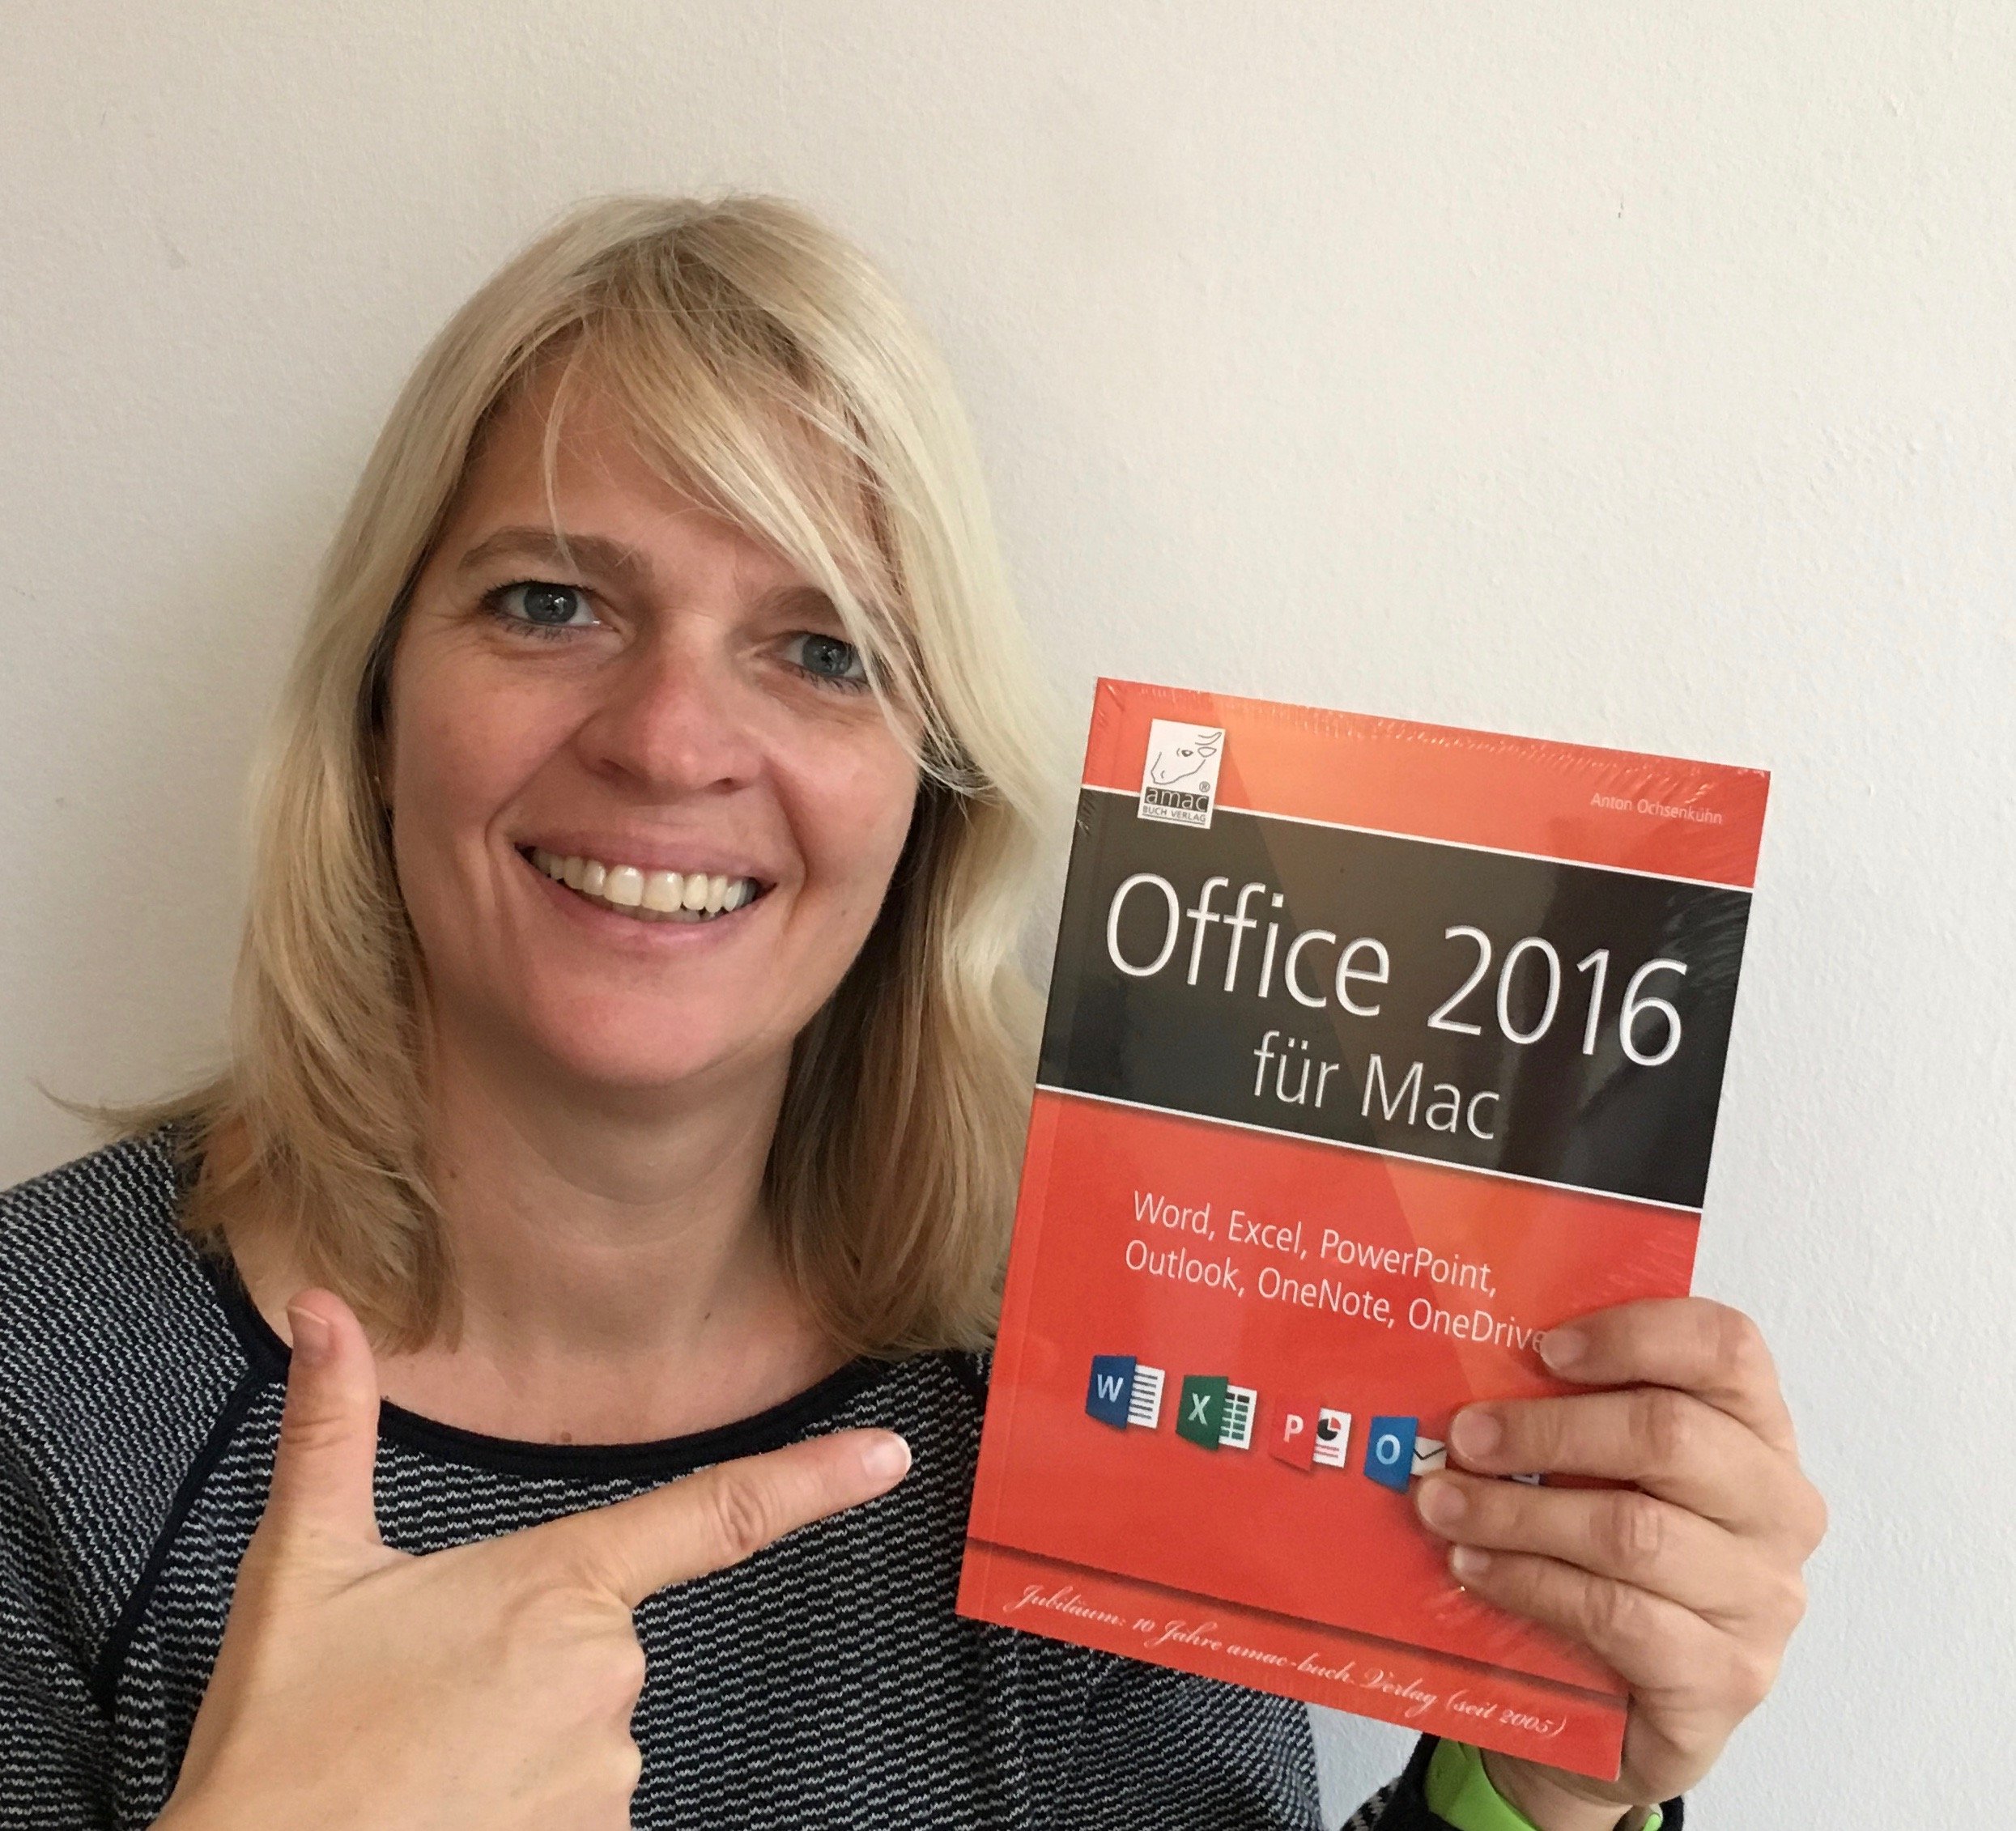 office for mac 2016 books